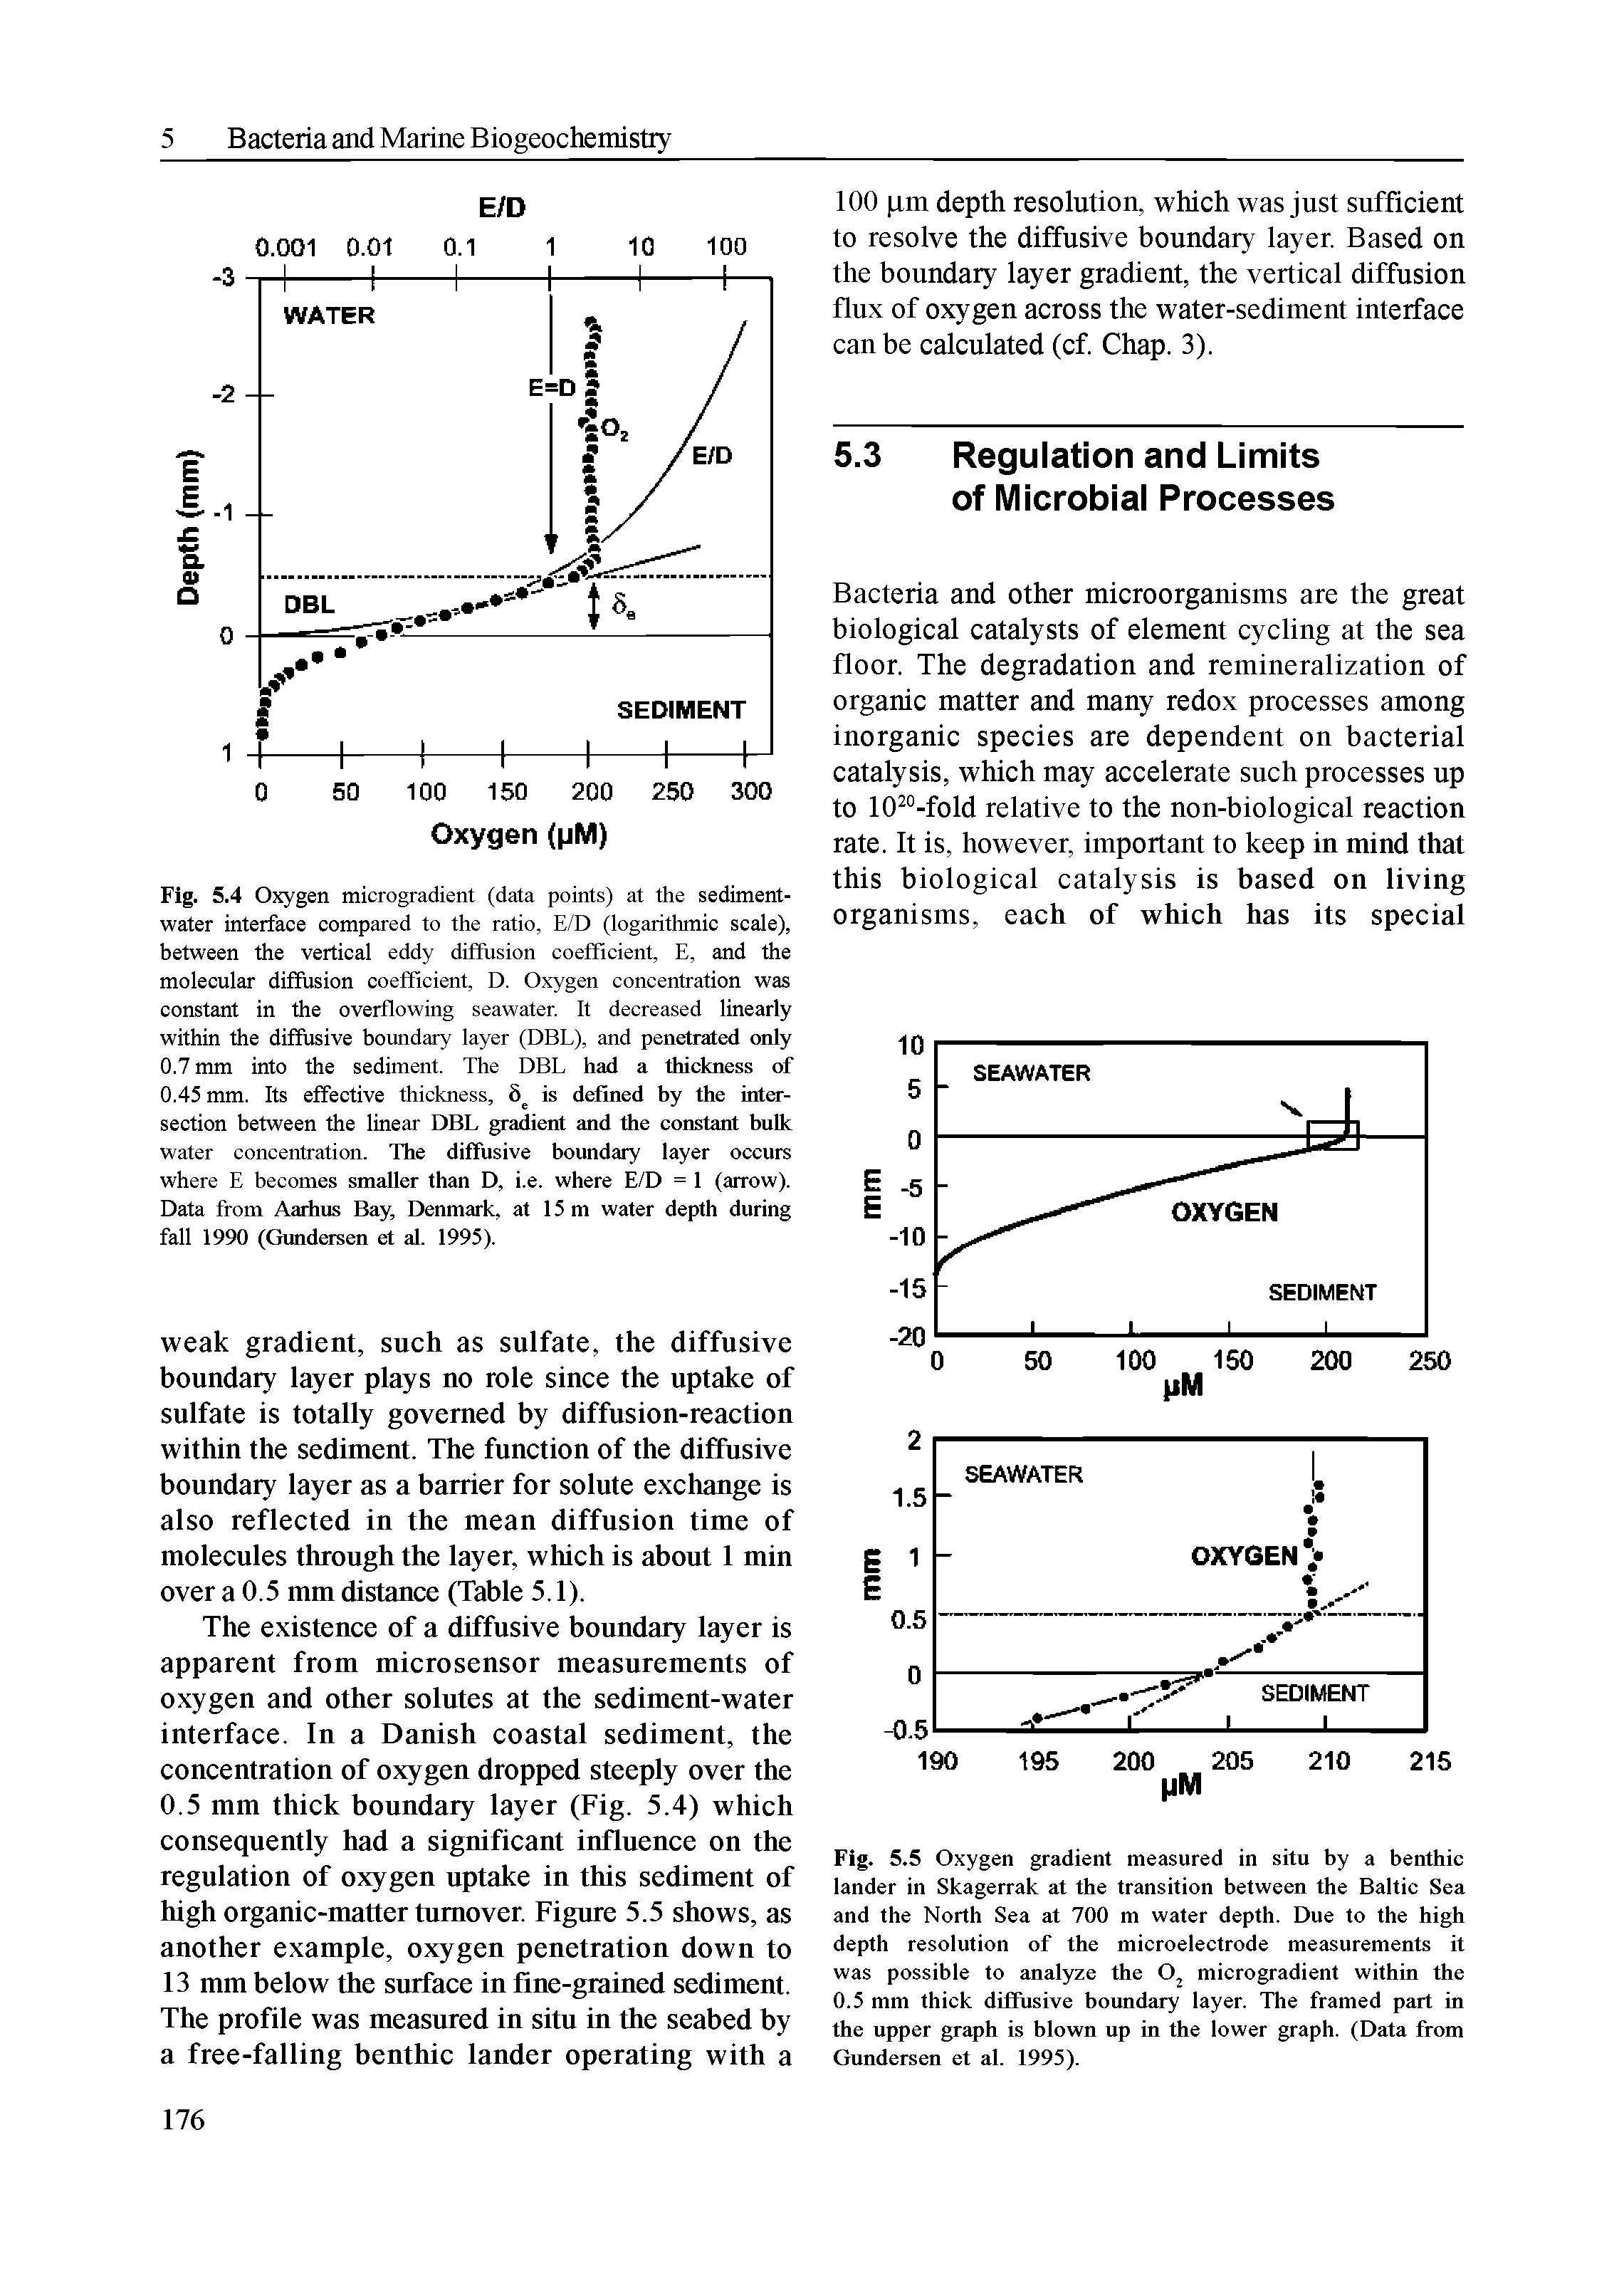 Fig. 5.4 Oxygen microgradient (data points) at the sediment-water interface compared to the ratio, E/D (logarithmic scale), between the vertical eddy diffusion coefficient, E, and the molecular diffusion coefficient, D. Oxygen concentration was constant in the overflowing seawater. It decreased linearly within the diffusive boundary layer (DEL), and penetrated only 0.7 mm into the sediment. The DEL had a diickness of 0.45 mm. Its effective thickness, 8 is defined by the intersection between the linear DEL gradient and die constant bulk water concentration. The diffusive boundary layer occurs where E becomes smaller than D, i.e. where E/D = 1 (arrow). Data from Aarhus Eay, Denmark, at 15 m water depth during fall 1990 (Gundersen et al. 1995).